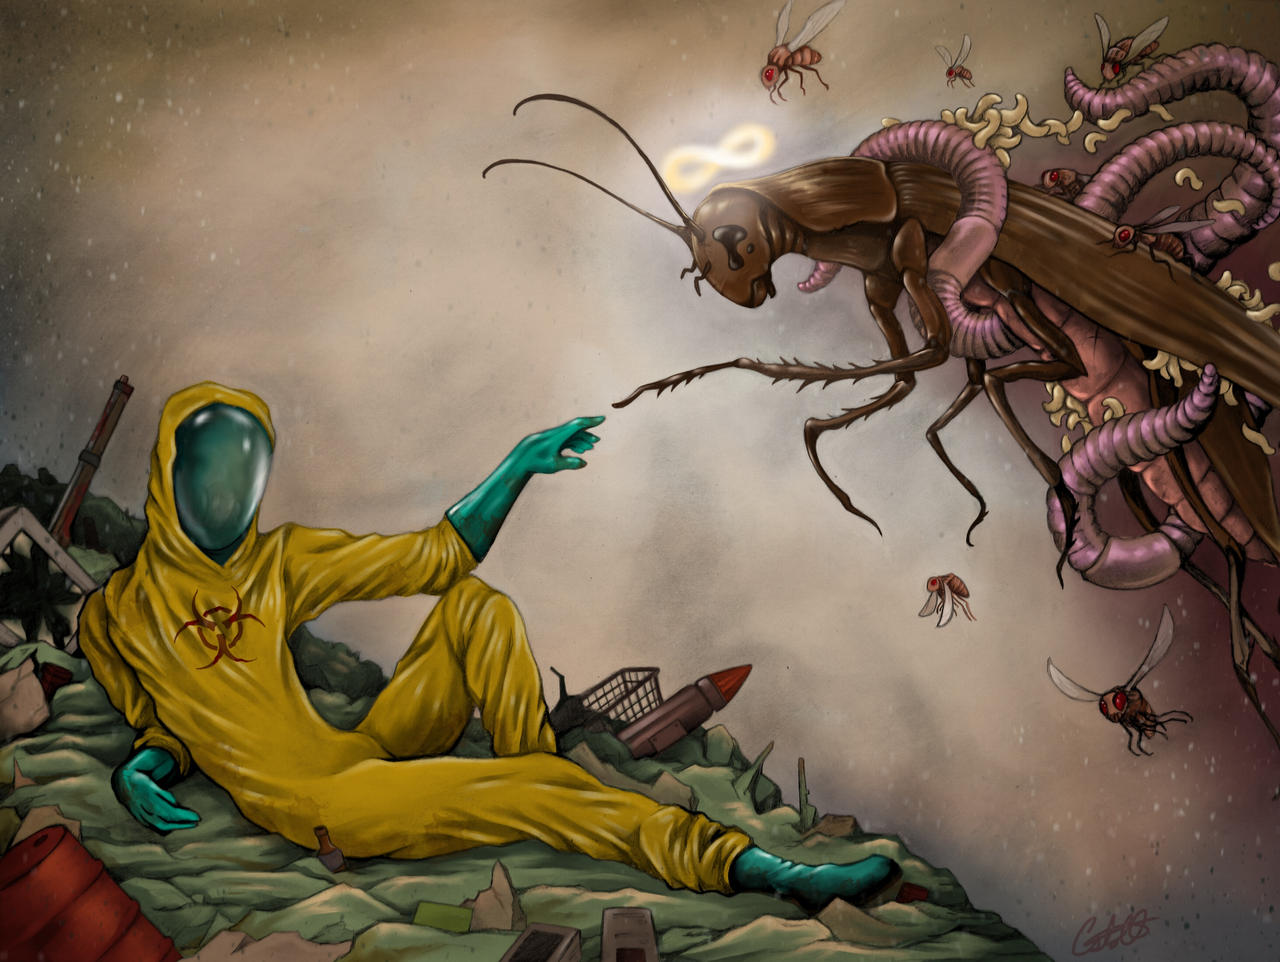 2014 ambiguous_gender antennae_(anatomy) arthropod barrel blattodea christopher-stoll clothing cockroach detailed_background dipteran feral floating flying gloves group gun halo handwear hazard_symbol hazmat_suit humanoid insect insect_wings inspired_by_formal_art larva maggot missile outside ranged_weapon reclining signature the_creation_of_adam trash weapon wings worm